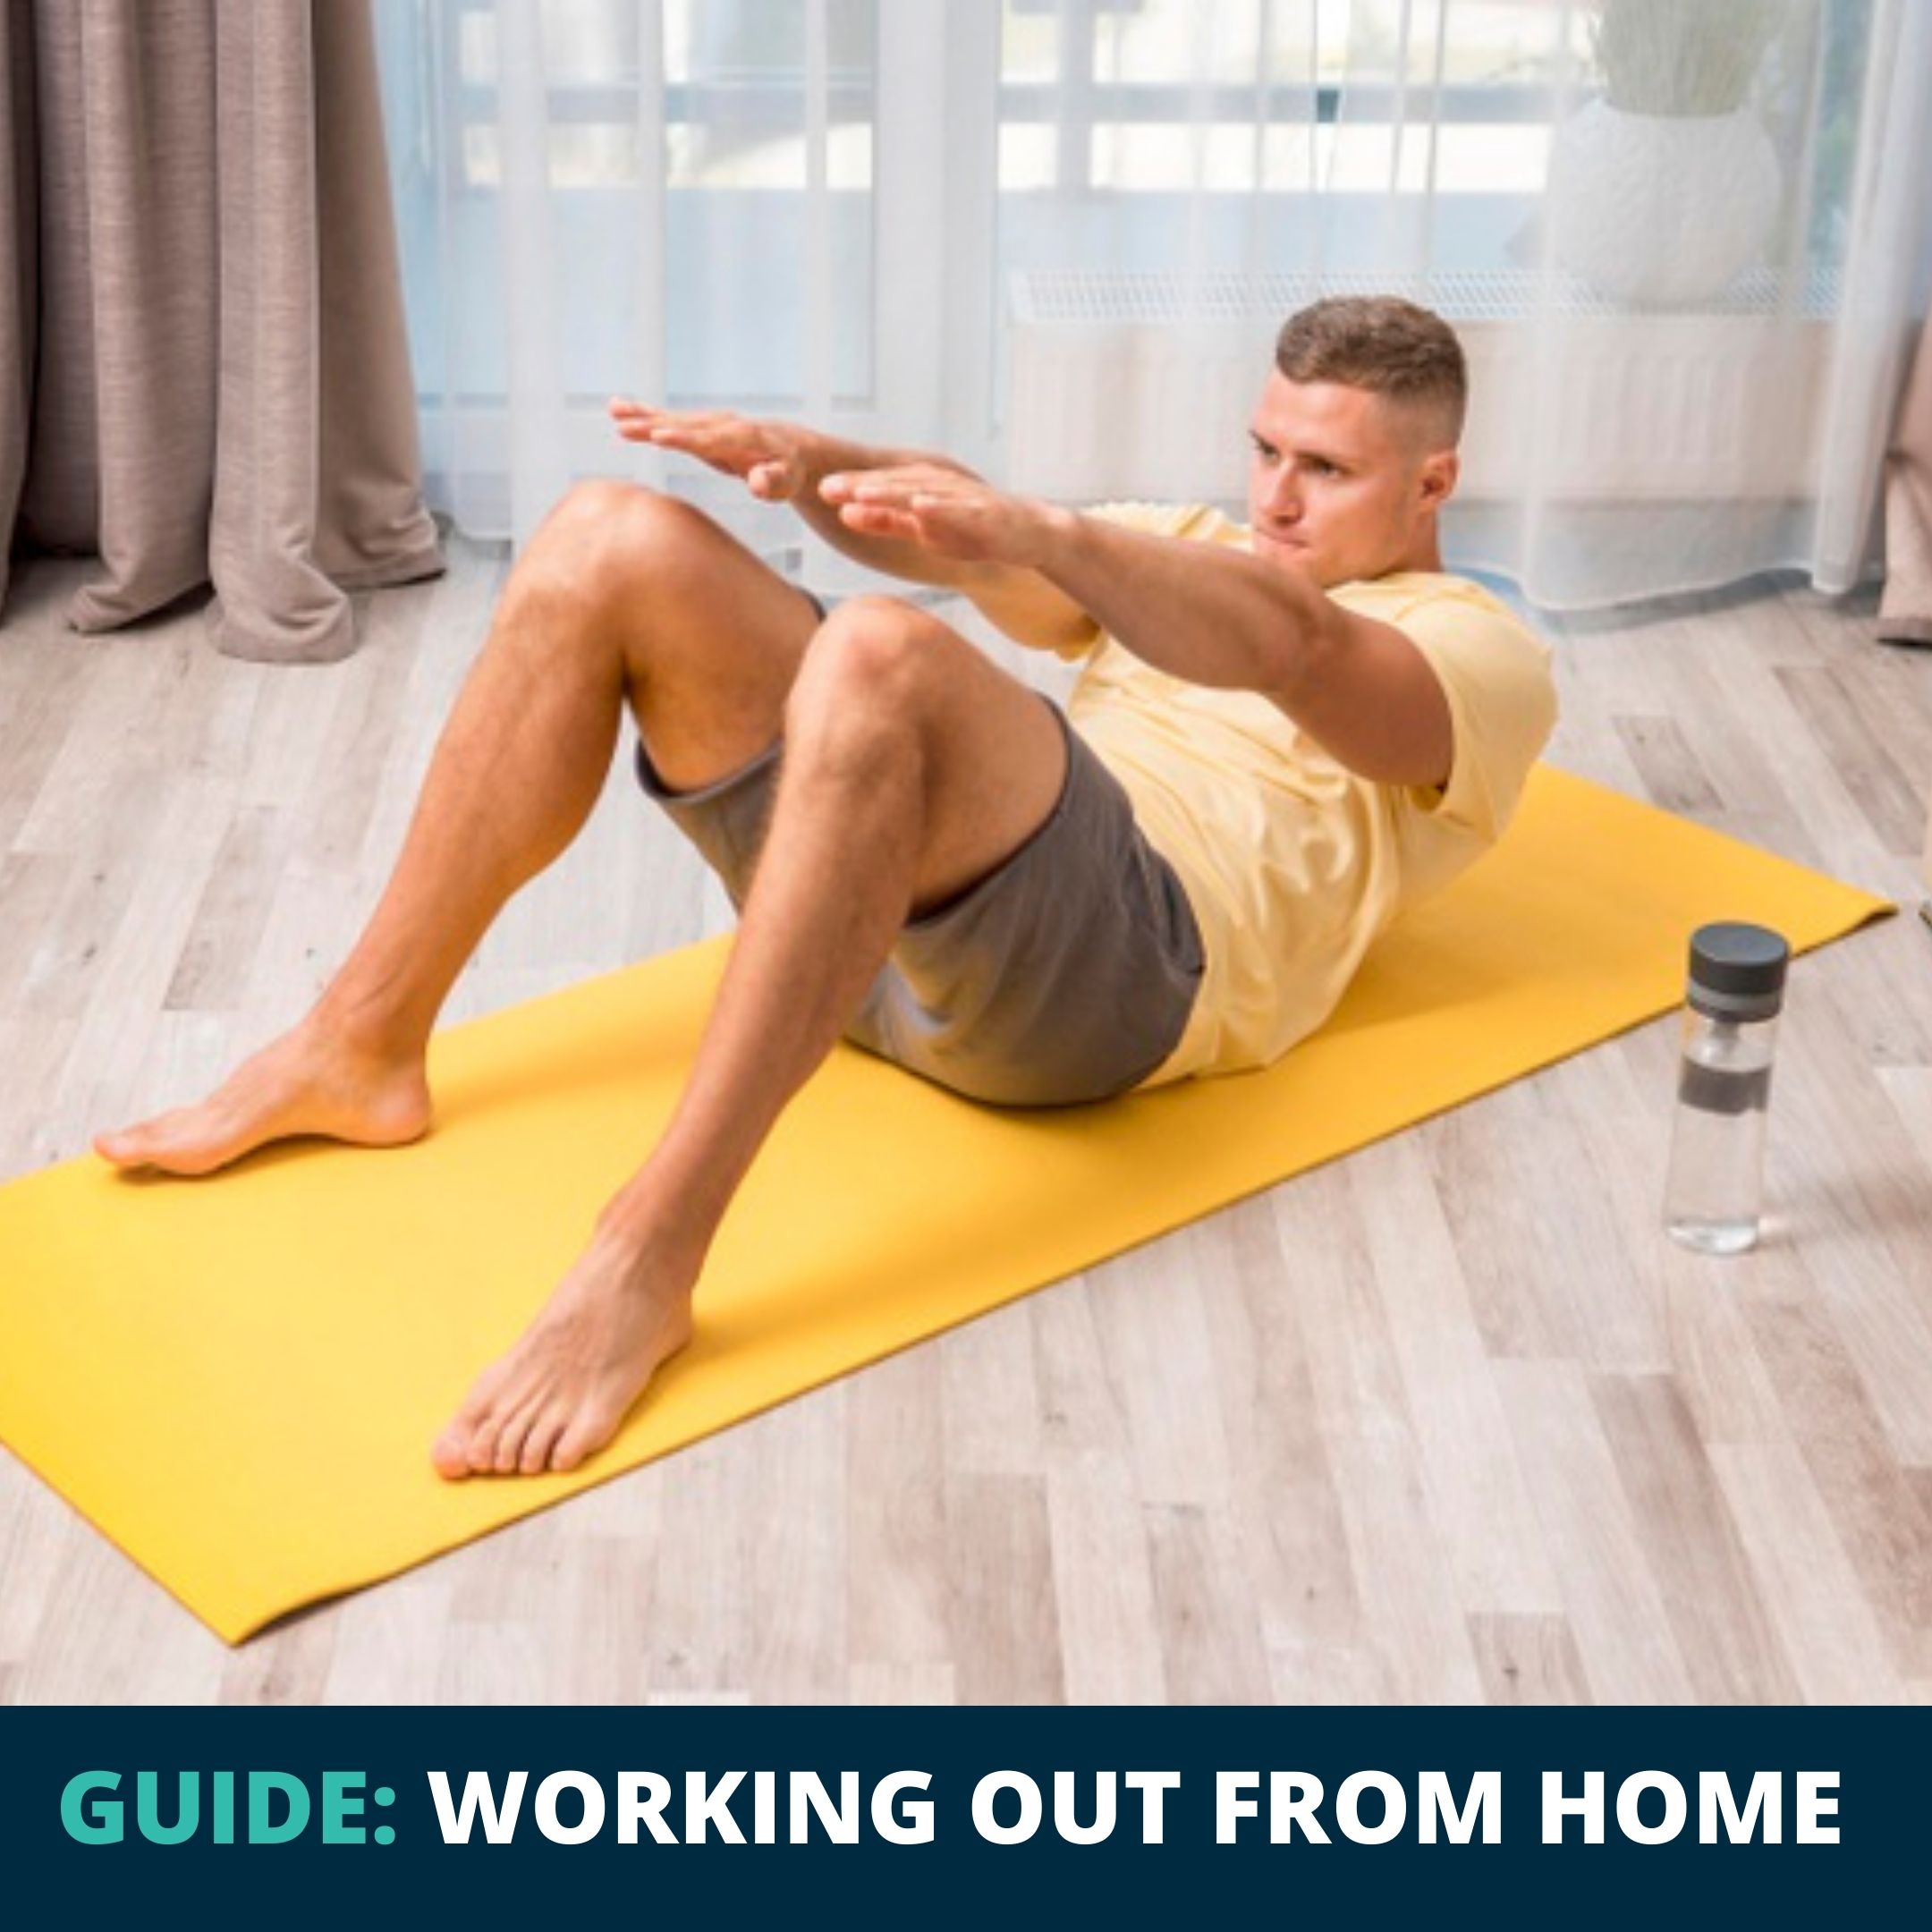 GUIDE: WORKING OUT FROM HOME